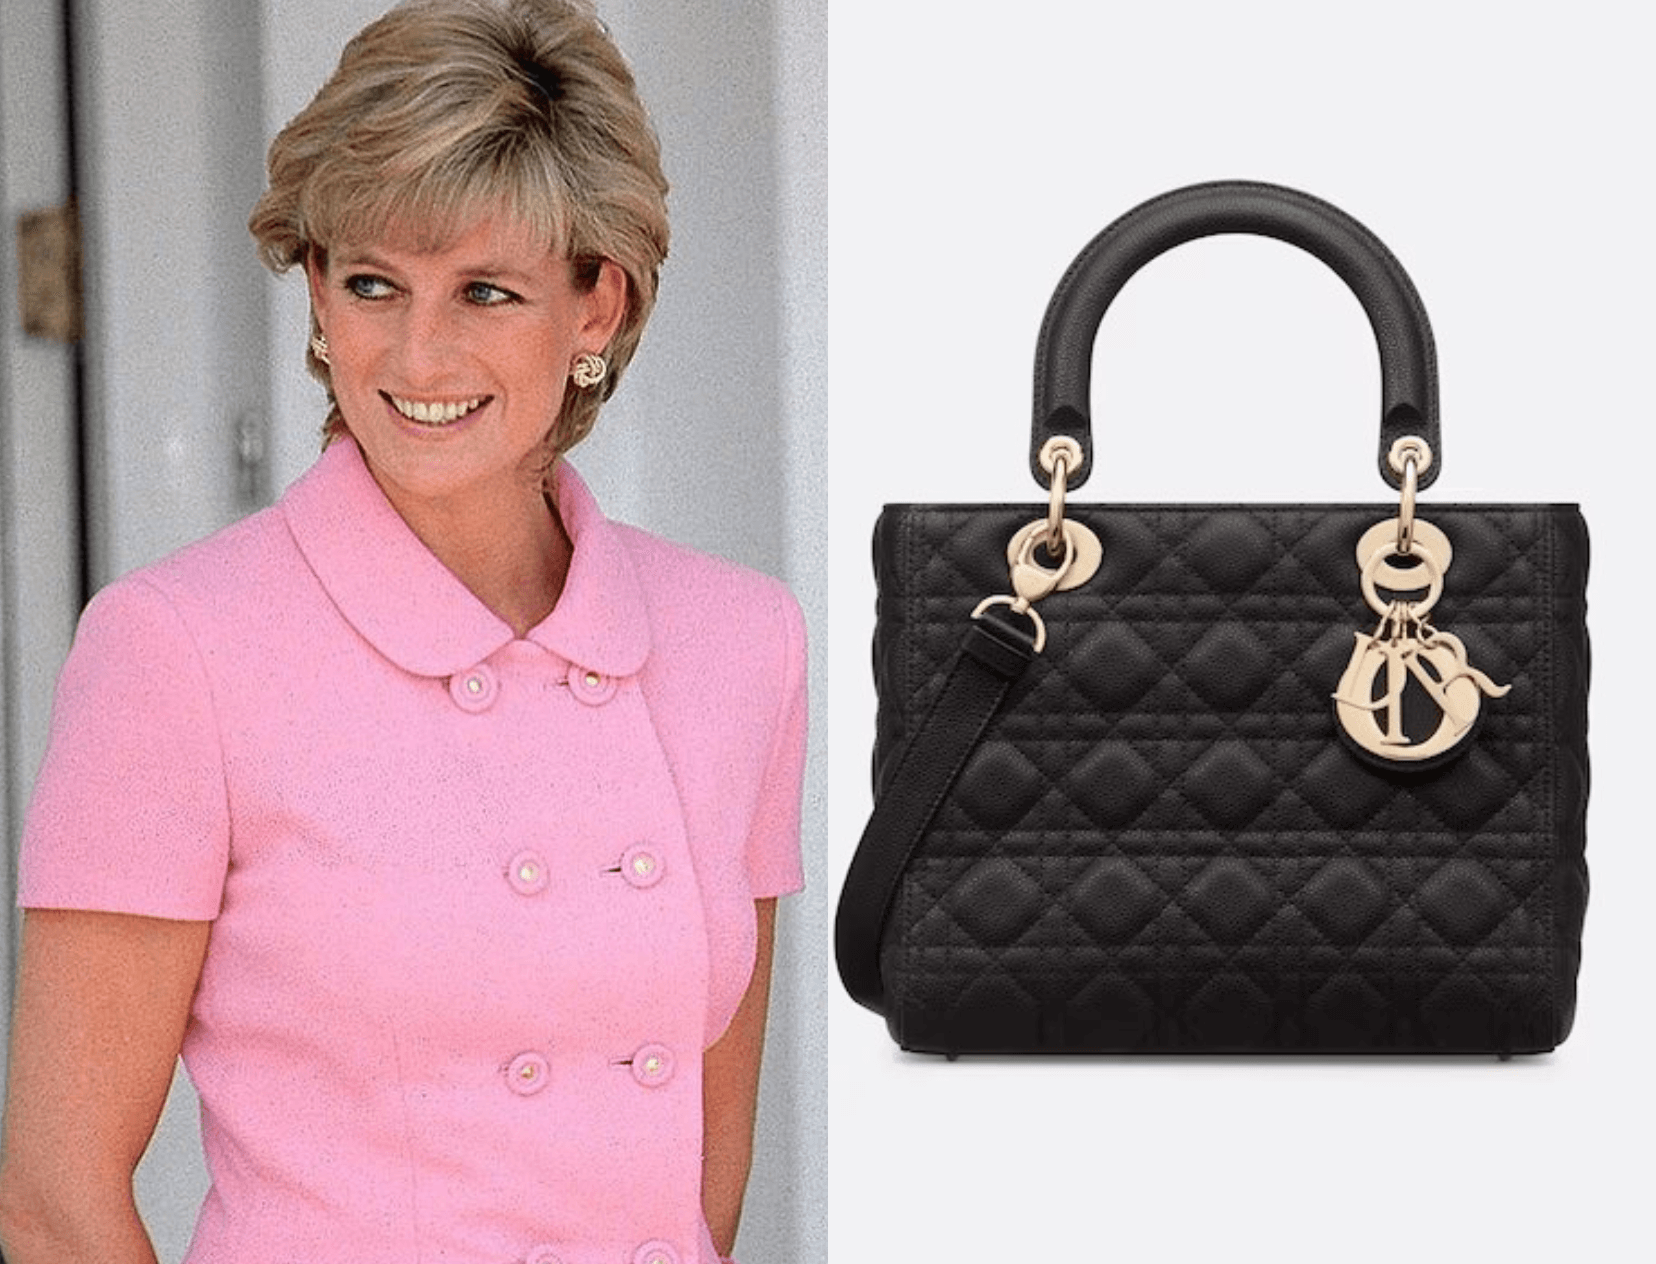 7 Iconic Handbags That Are Named After Celebrities!